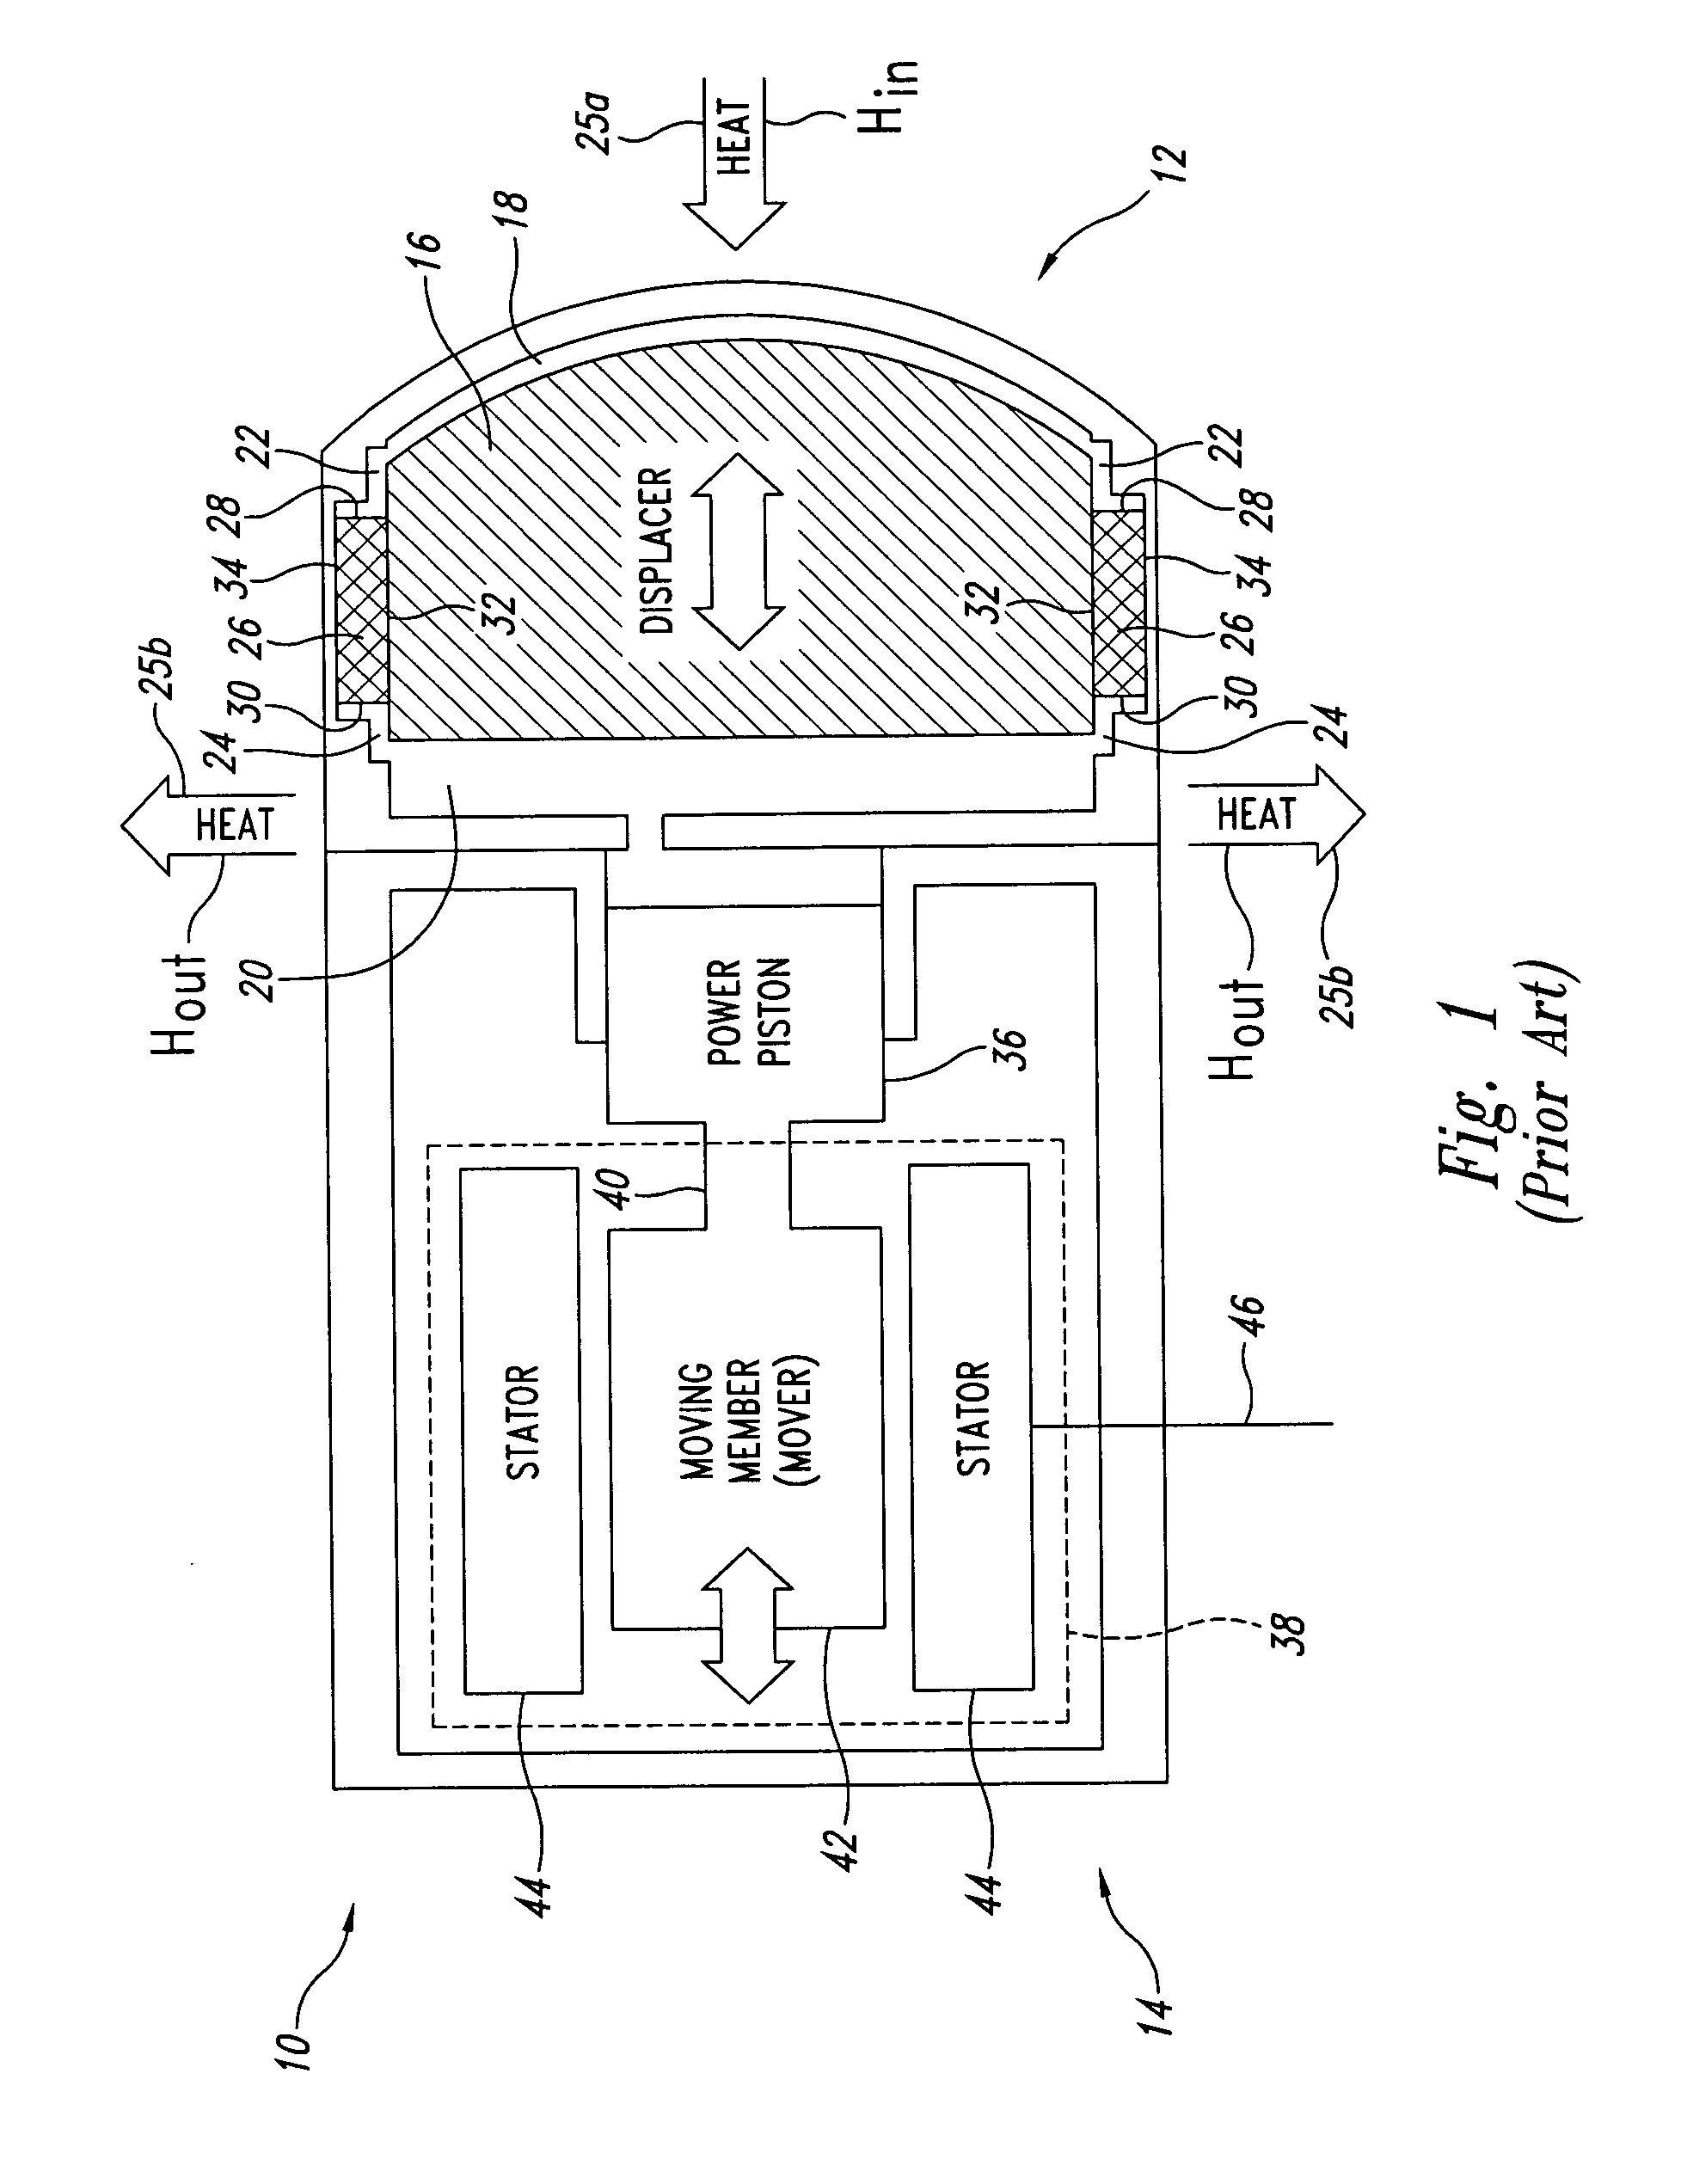 Channelized stratified regenerator system and method